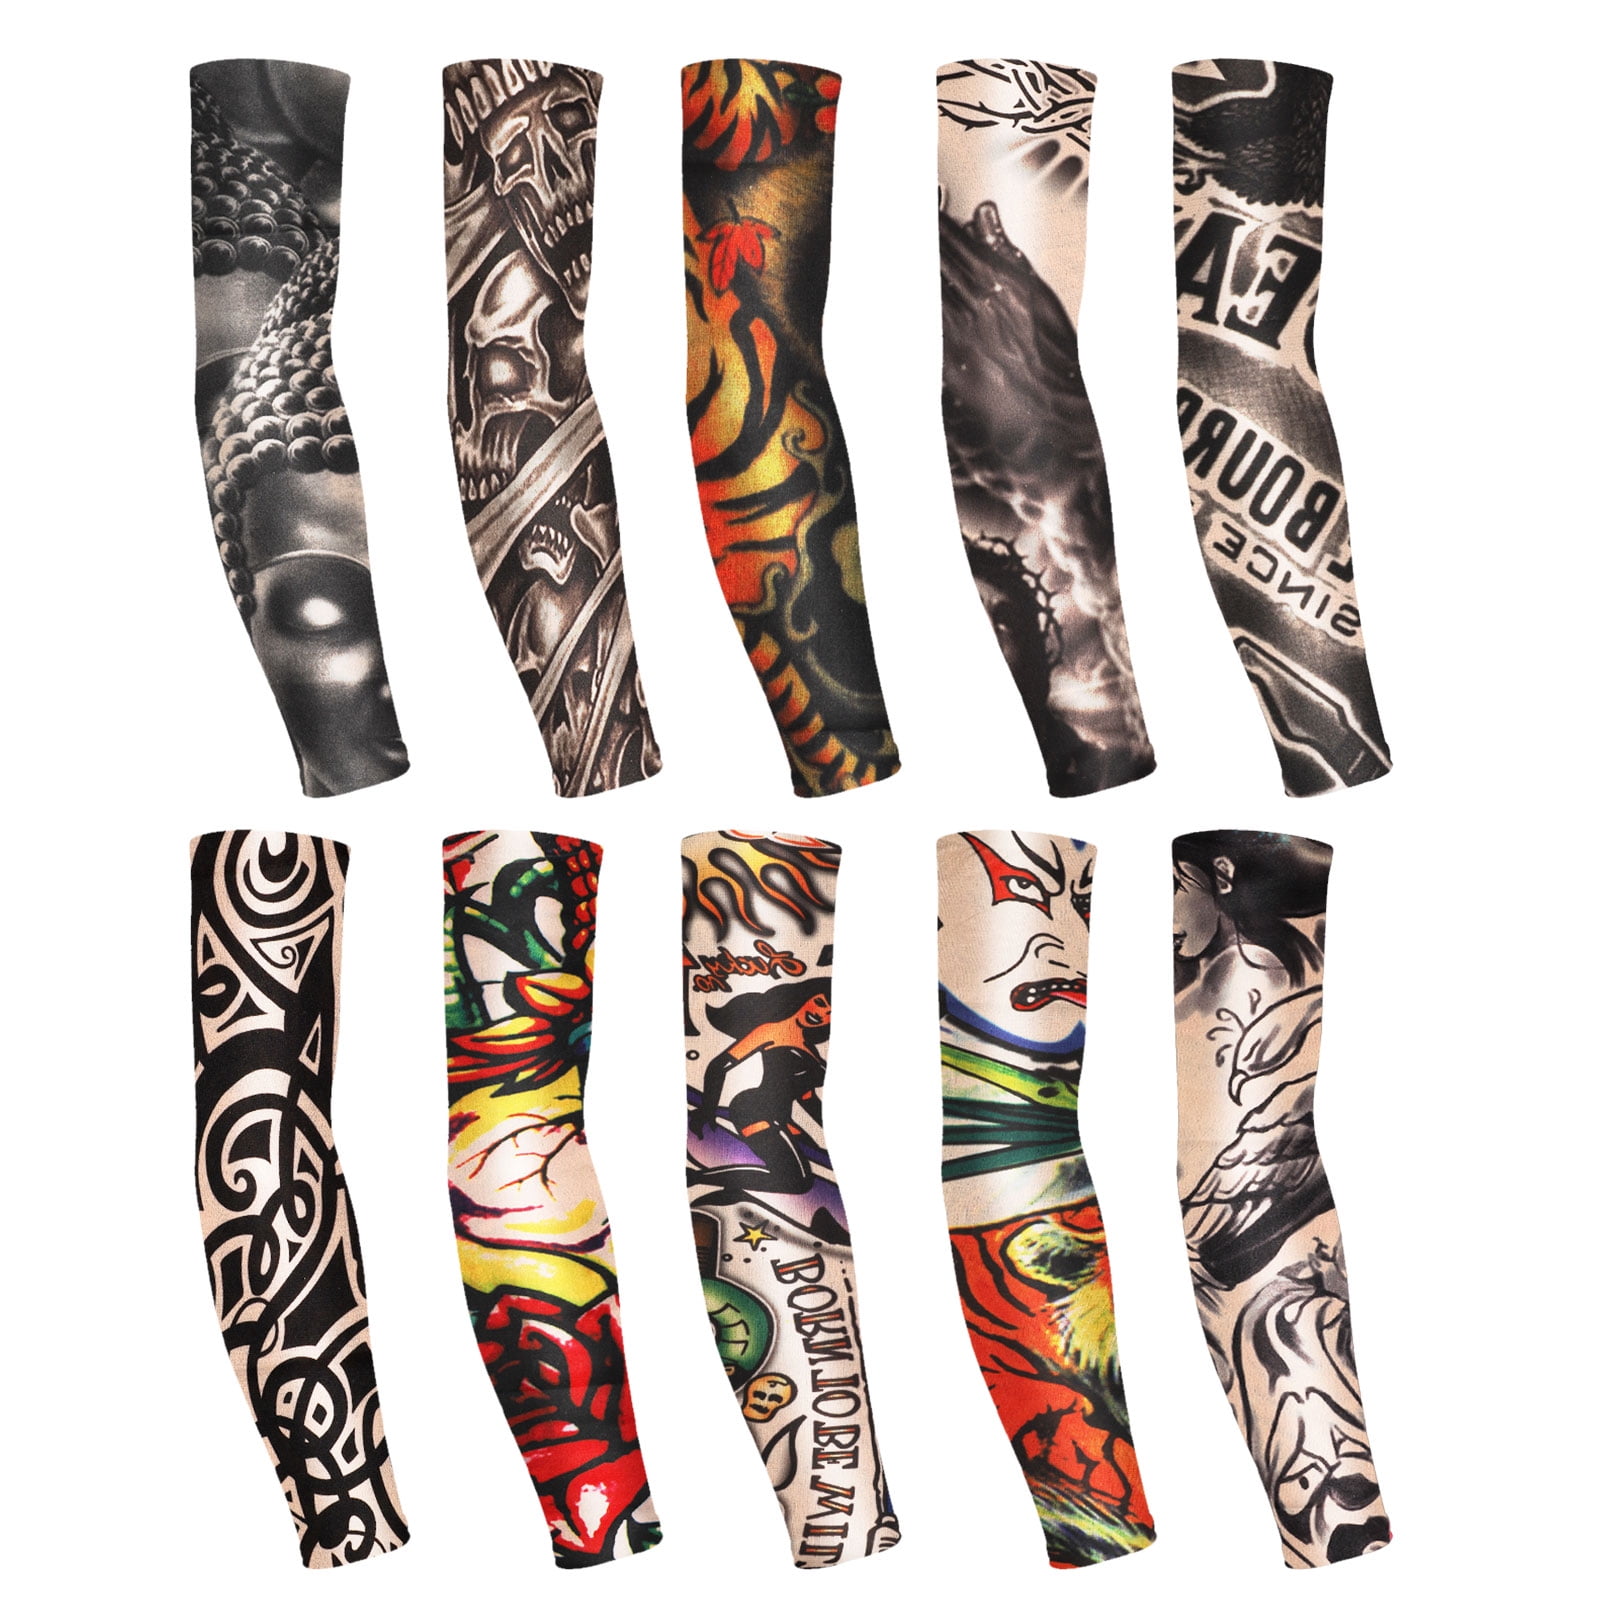 Arm Sleeves Flag Fireworks Mens Sun UV Protection Sleeves Arm Warmers Cool Long Set Covers